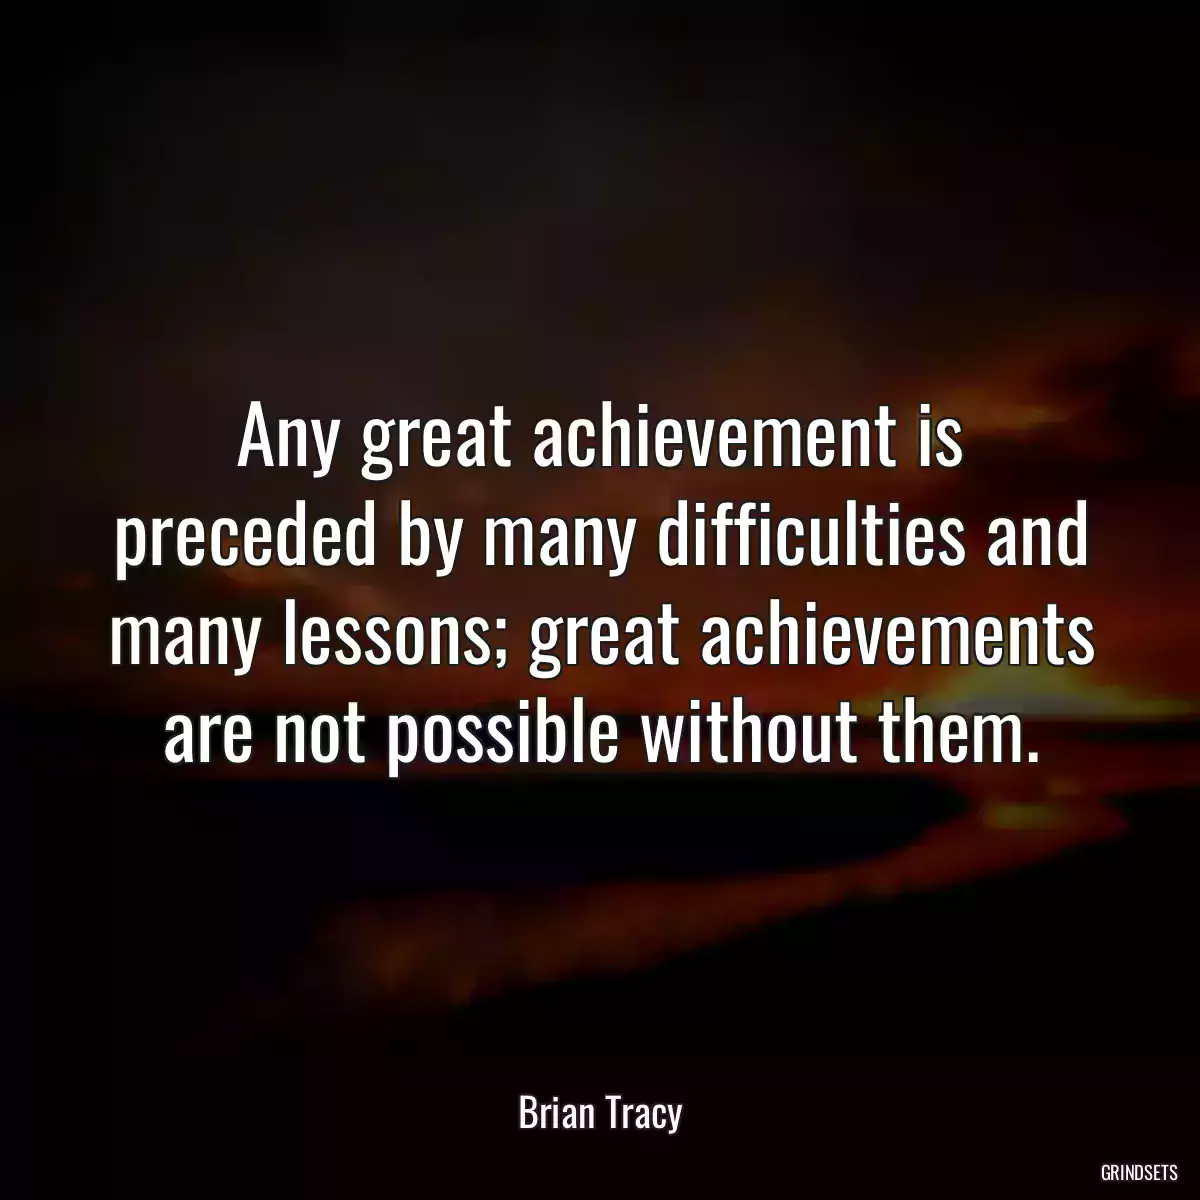 Any great achievement is preceded by many difficulties and many lessons; great achievements are not possible without them.